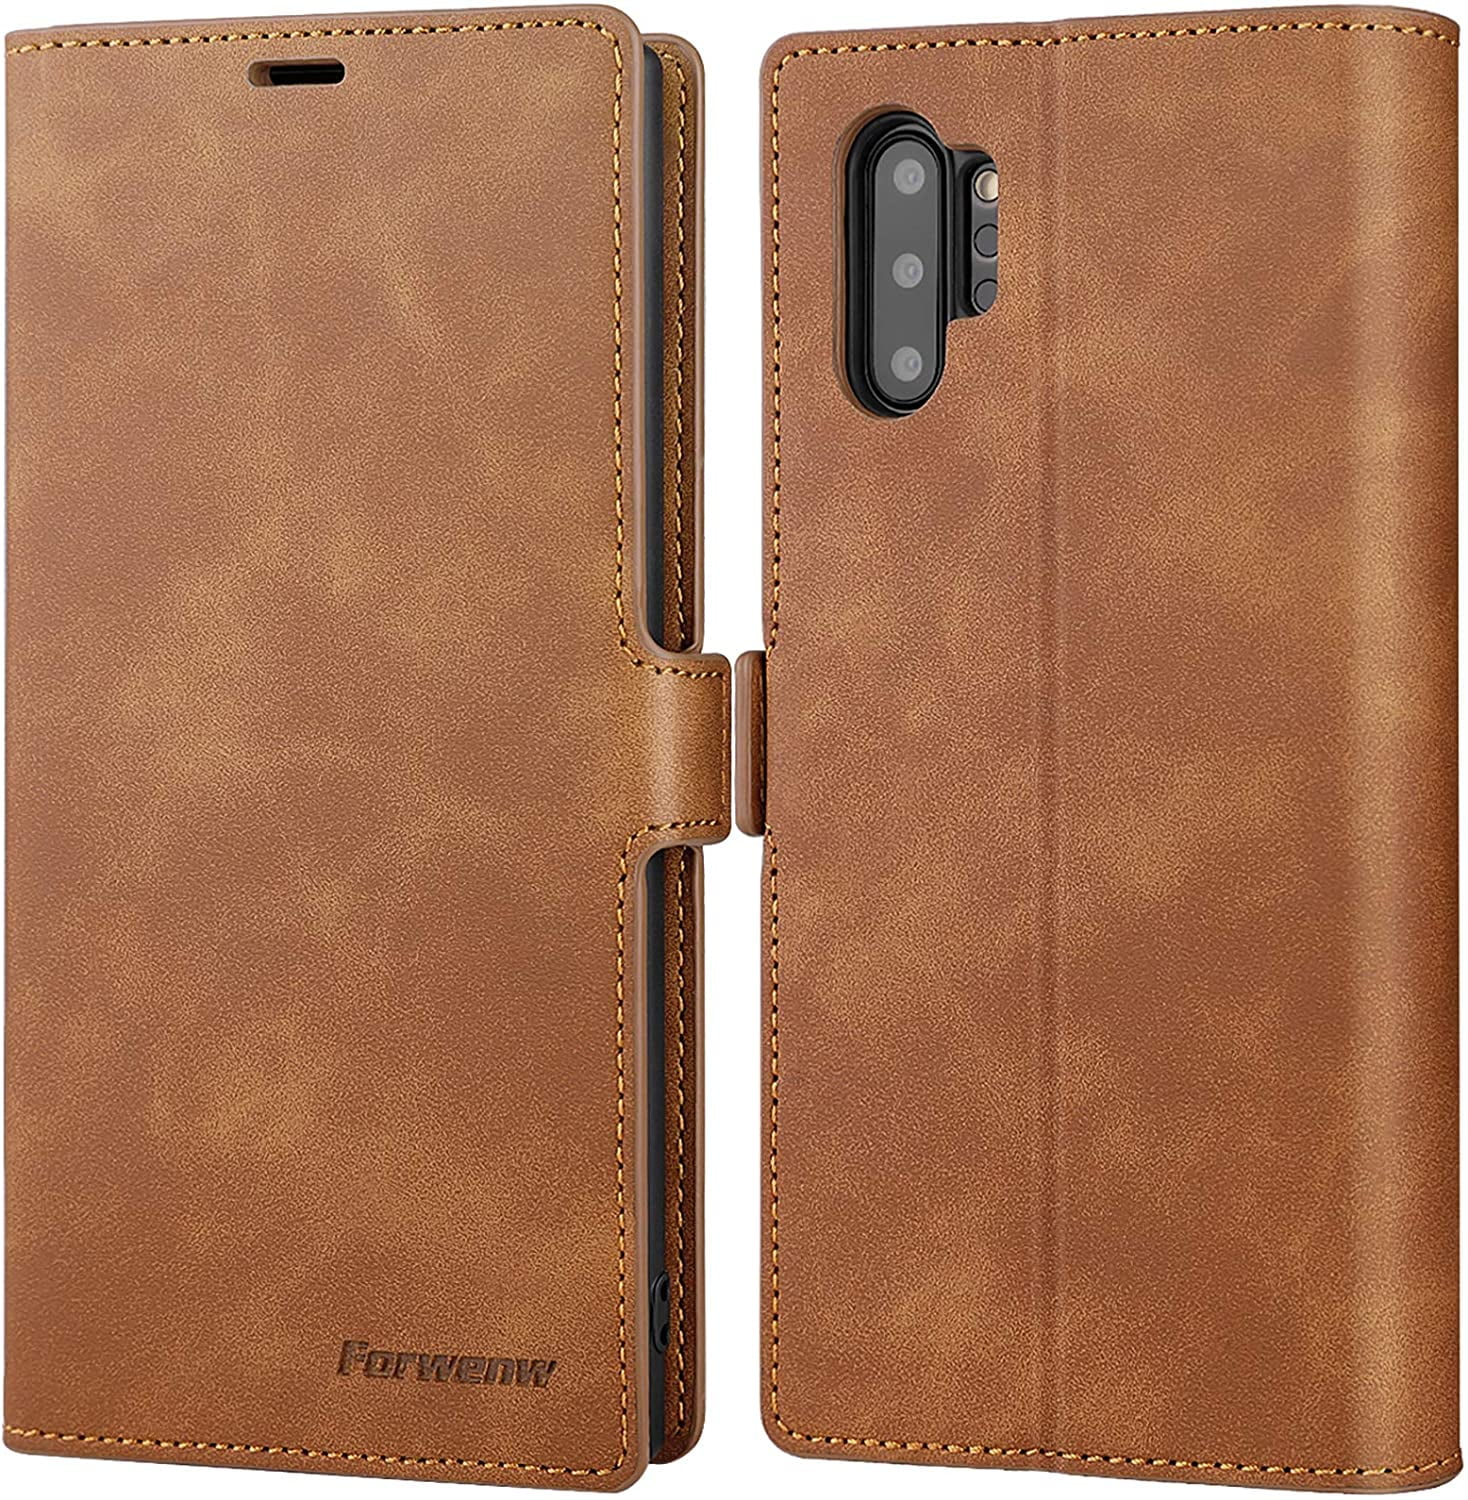 Cover for Samsung Galaxy Note8 Leather Card Holders Extra-Shockproof Business Mobile Phone Cover Kickstand with Free Waterproof-Bag Samsung Galaxy Note8 Flip Case